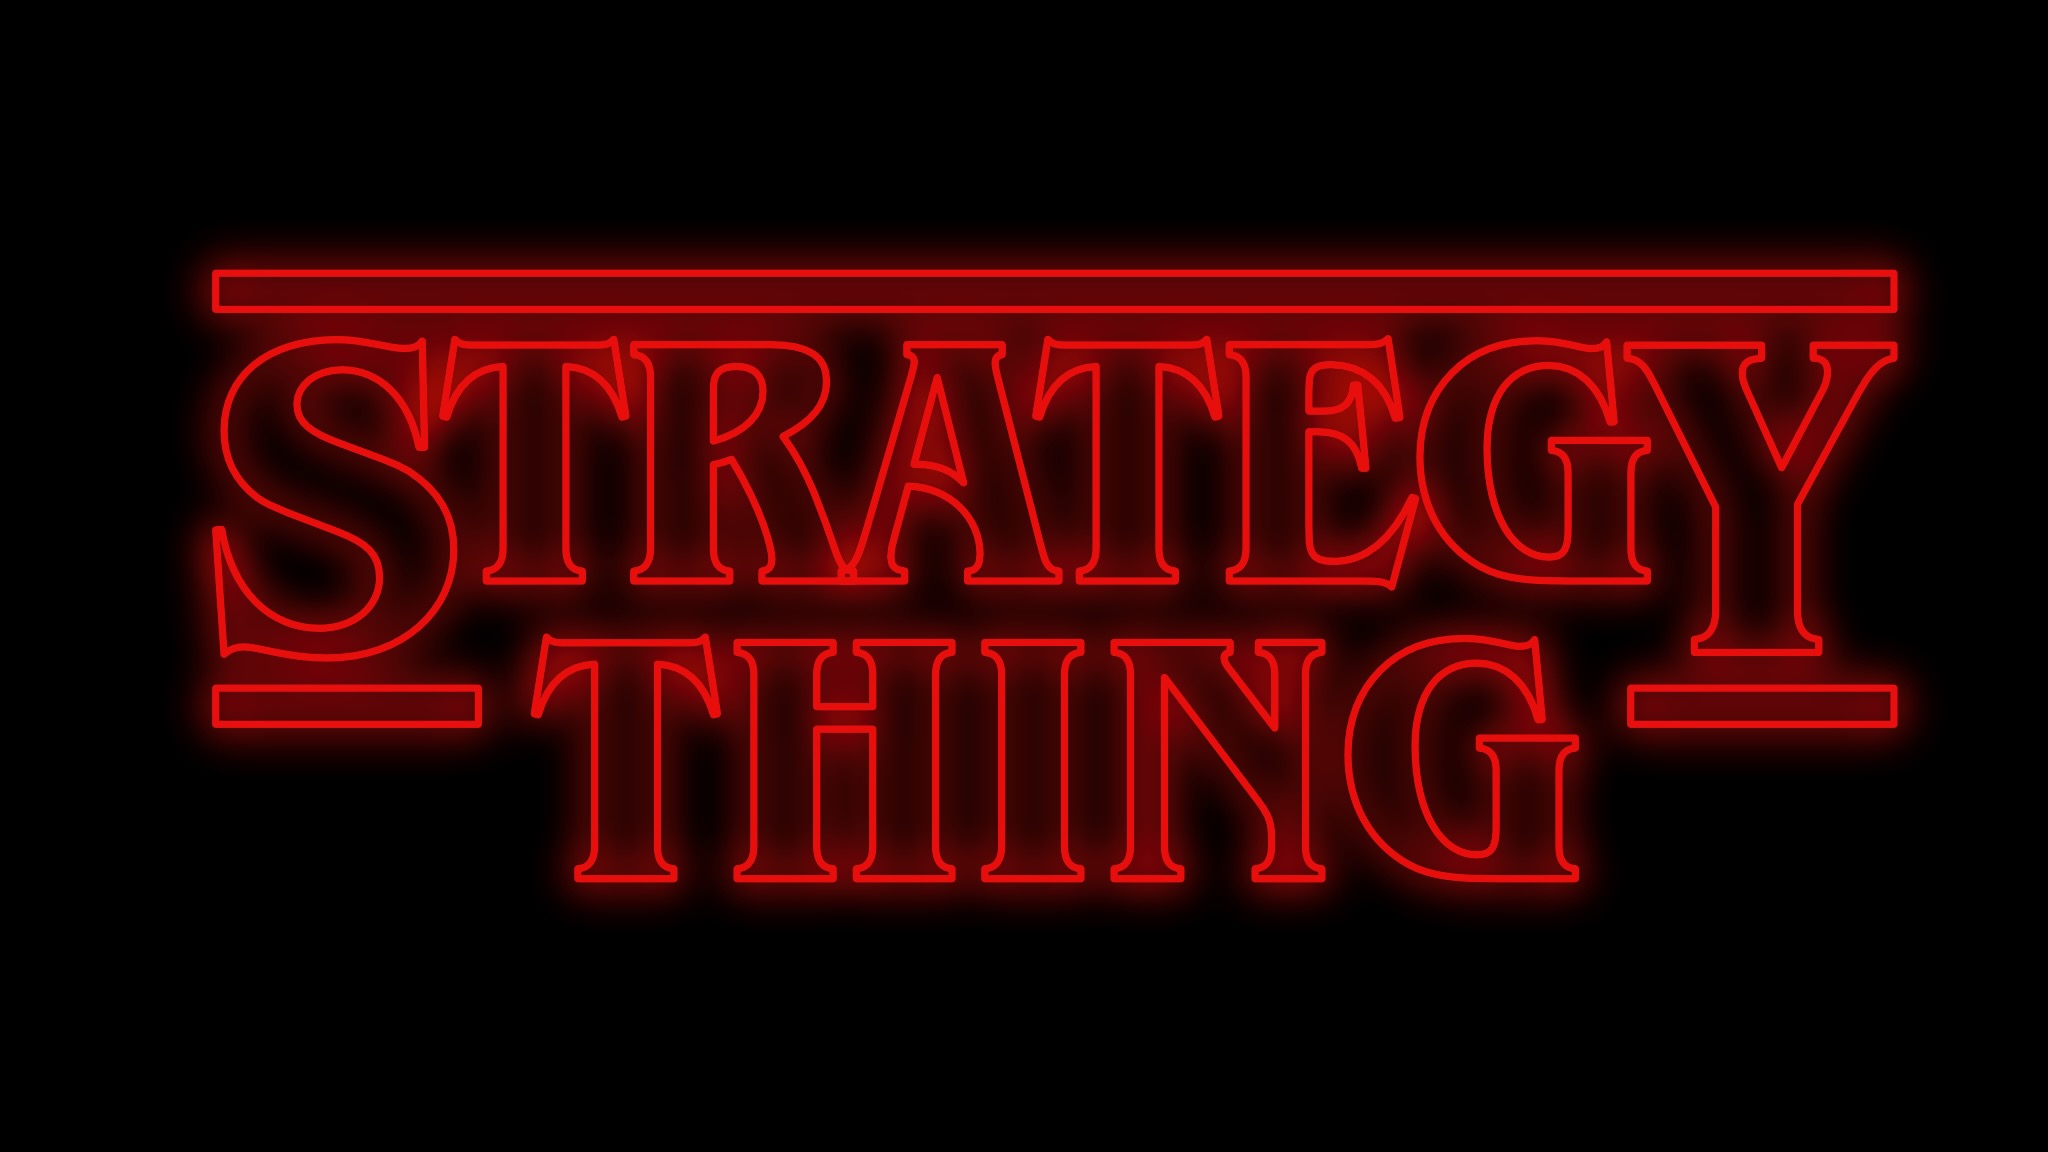 Strategy Thing - designed in the style of "Stranger Things"